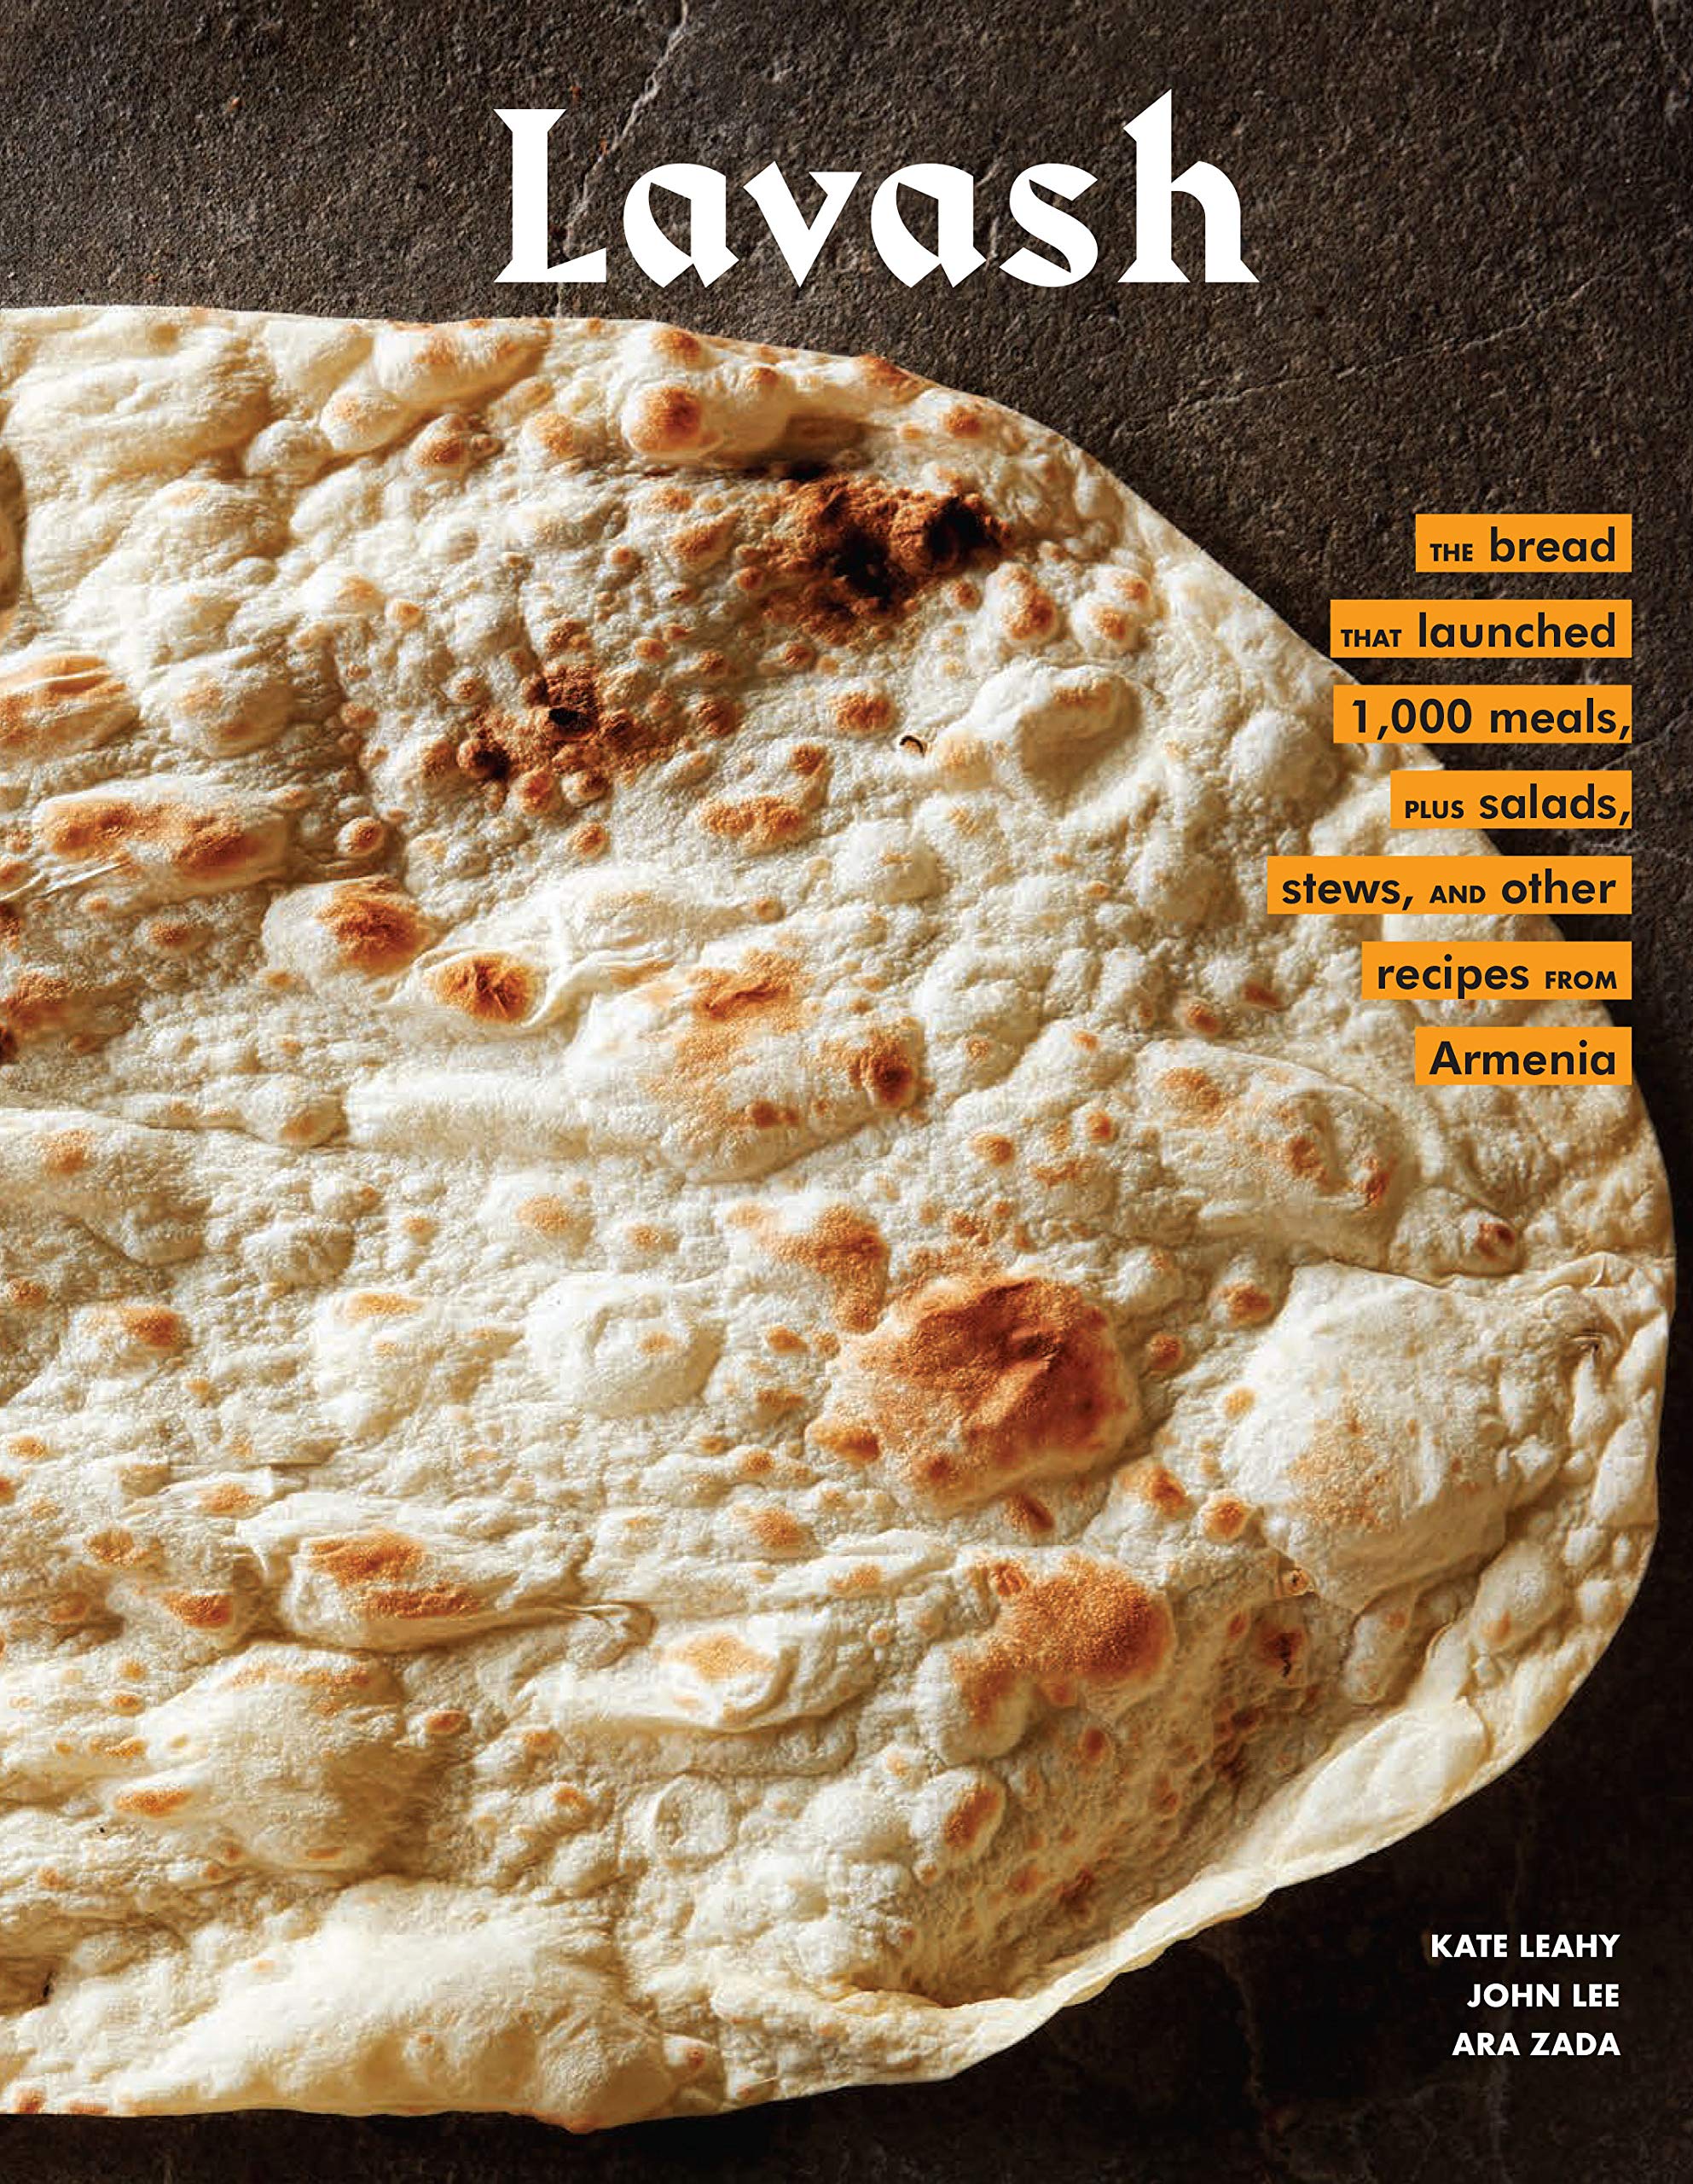 Lavash: The bread that launched 1,000 meals, plus salads, stews, and other recipes from Armenia (Kate Leahy, Ara Zada, John Lee)